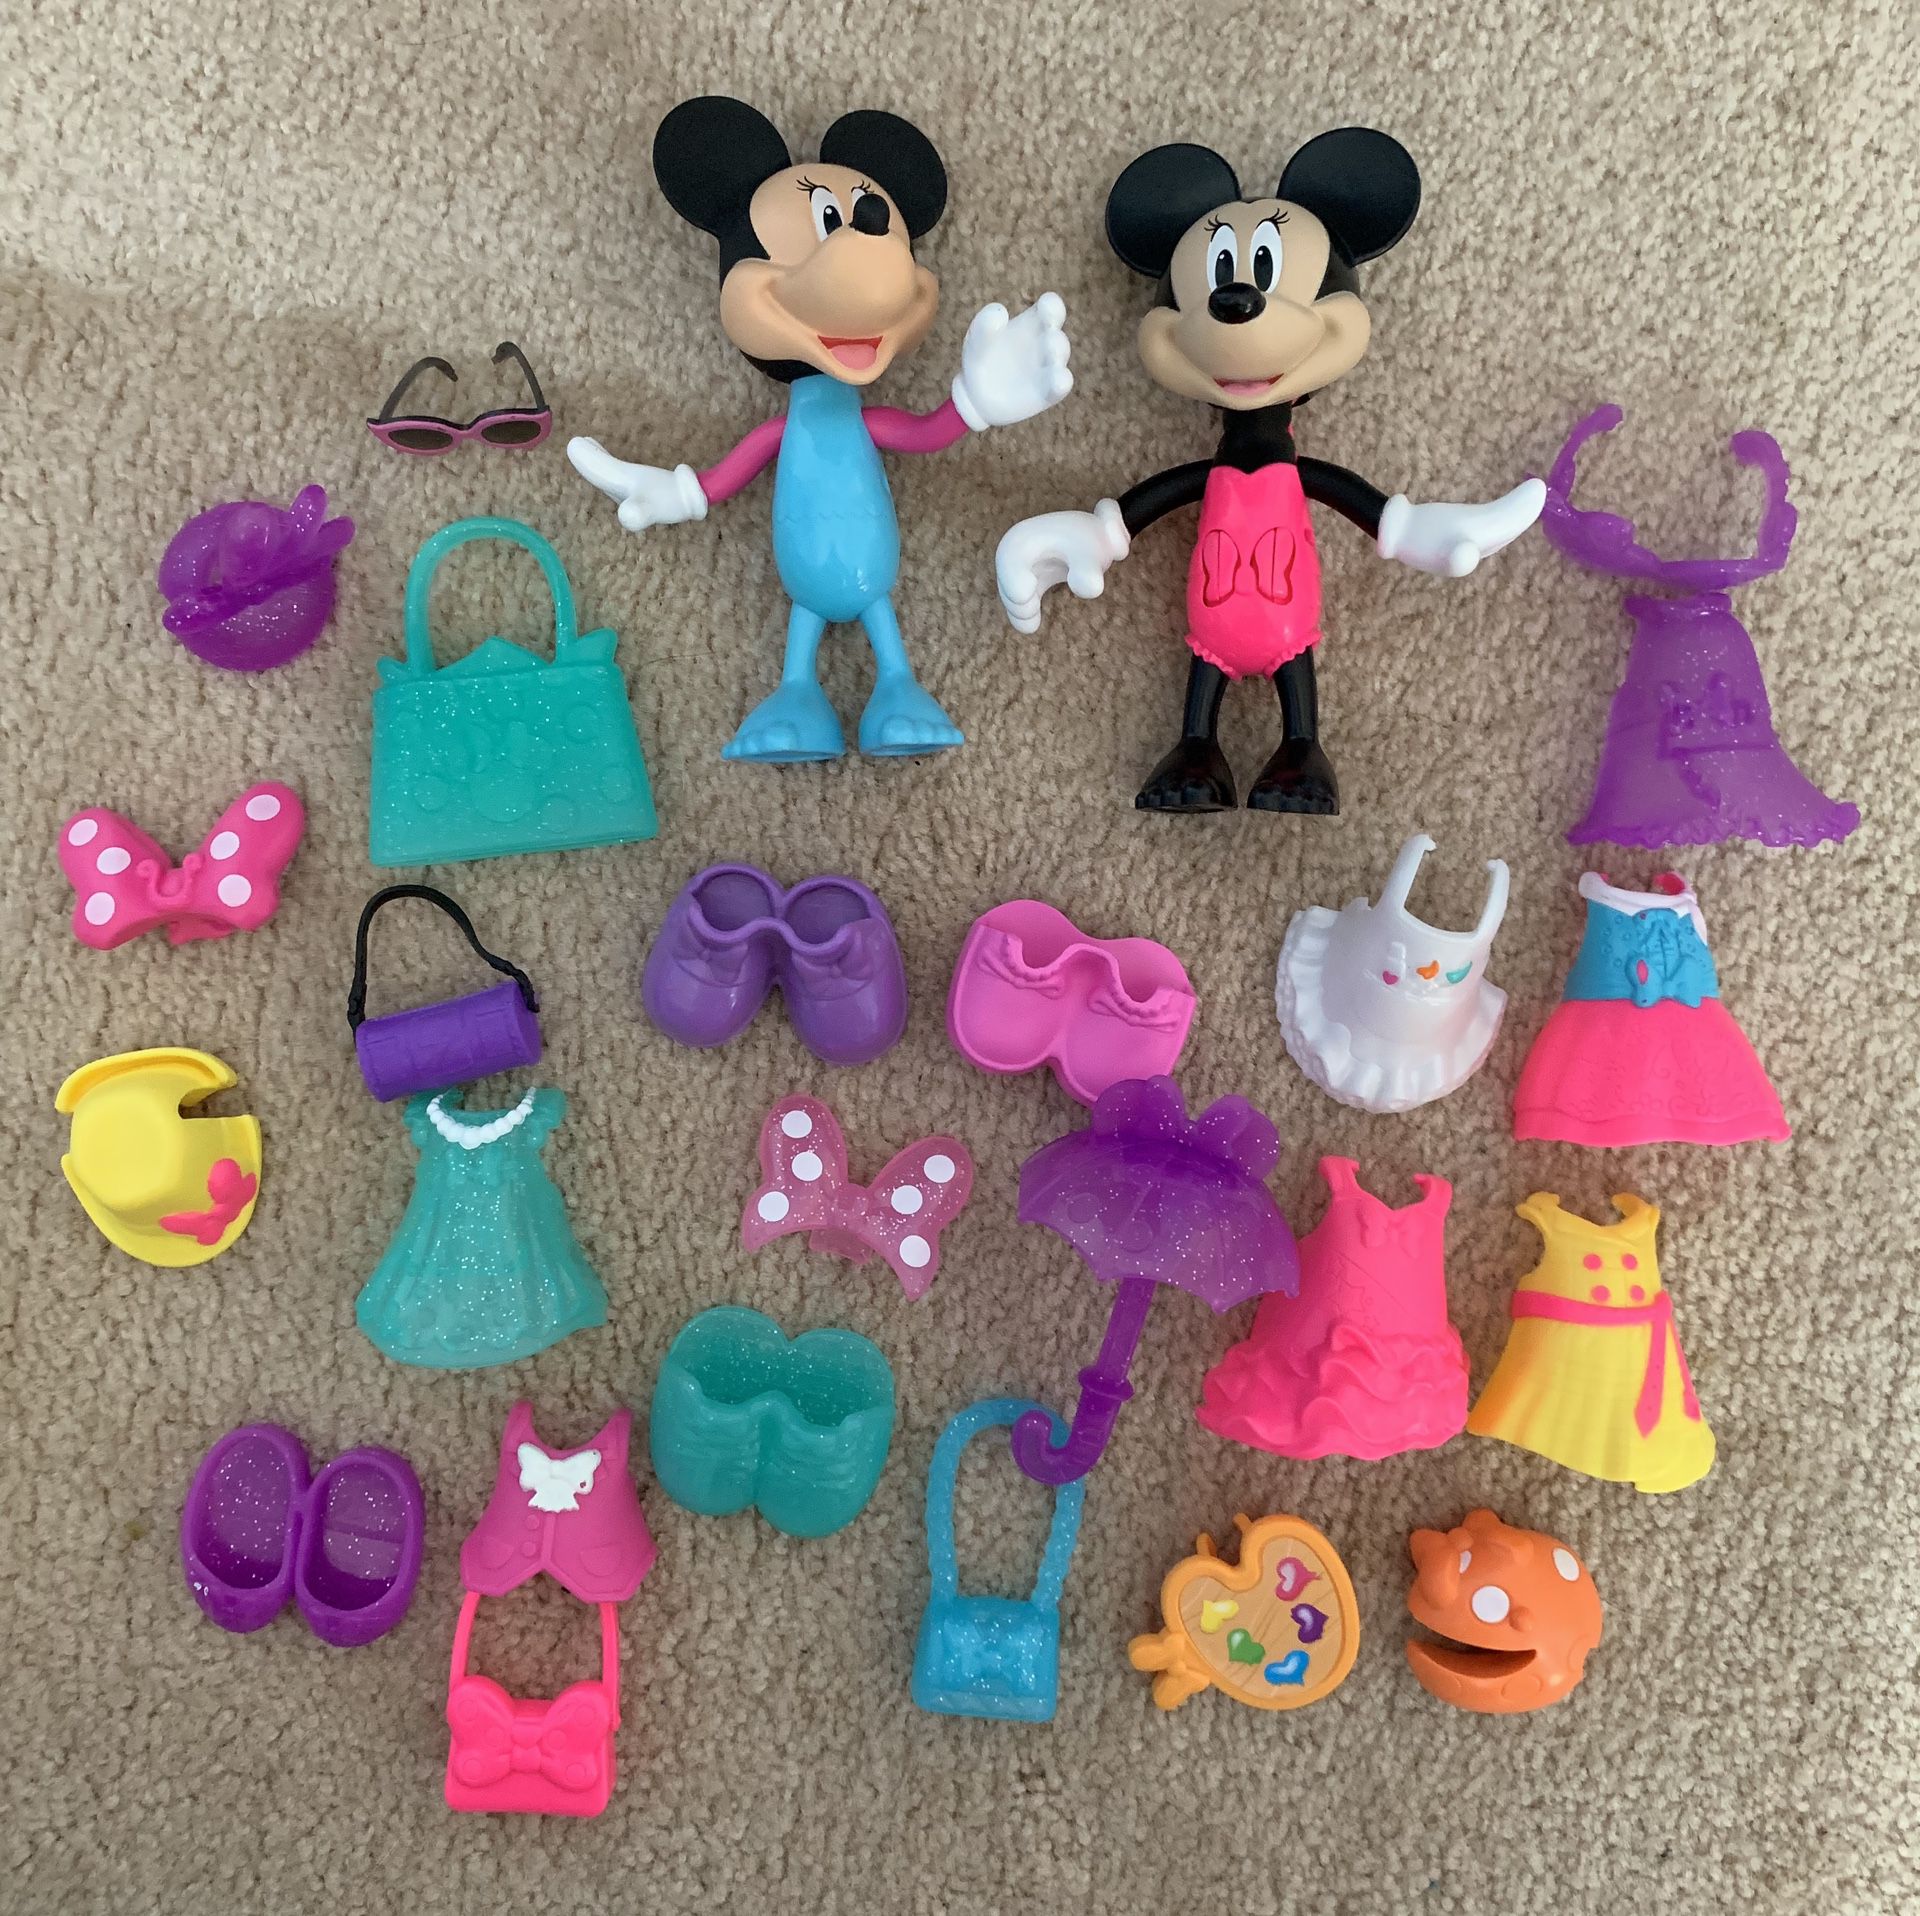 Minnie Mouse toy set